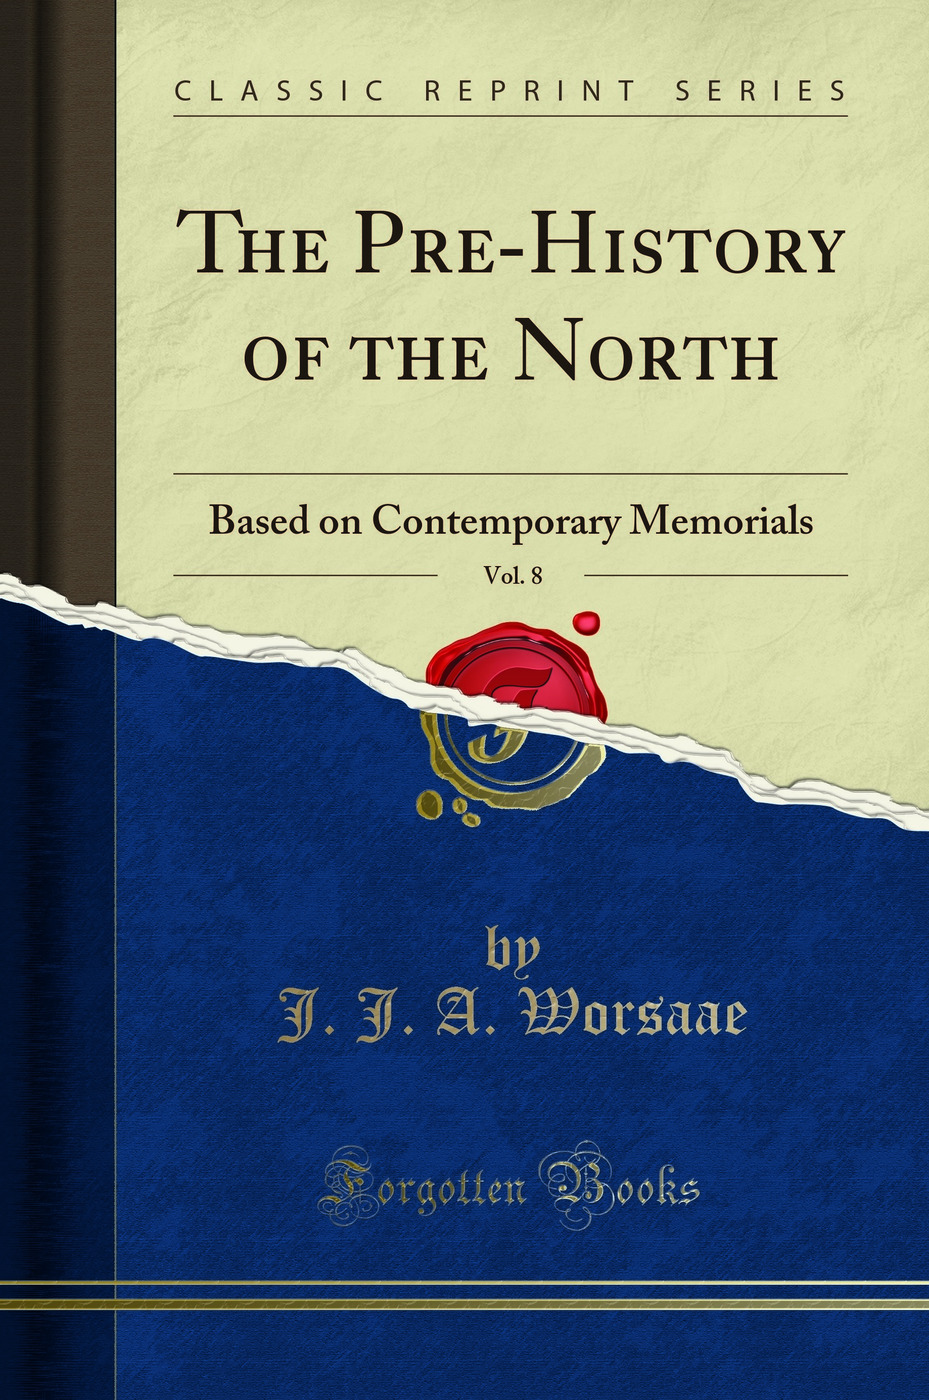 The Pre-History of the North, Vol. 8: Based on Contemporary Memorials - J. J. A. Worsaae